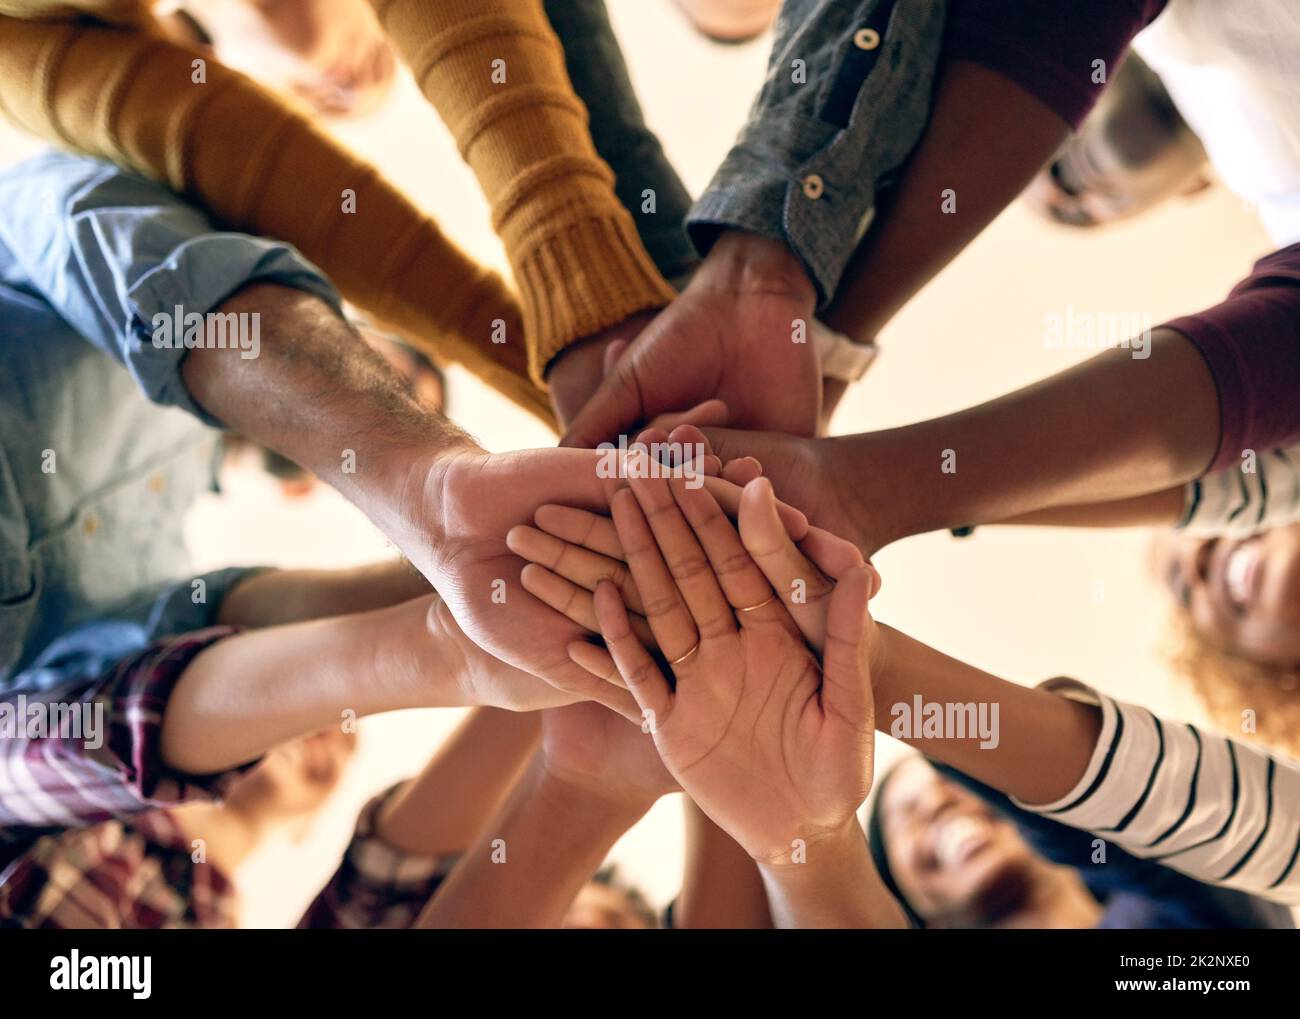 Joining their strengths in unity. Low angle shot of a group of people joining their hands together. Stock Photo